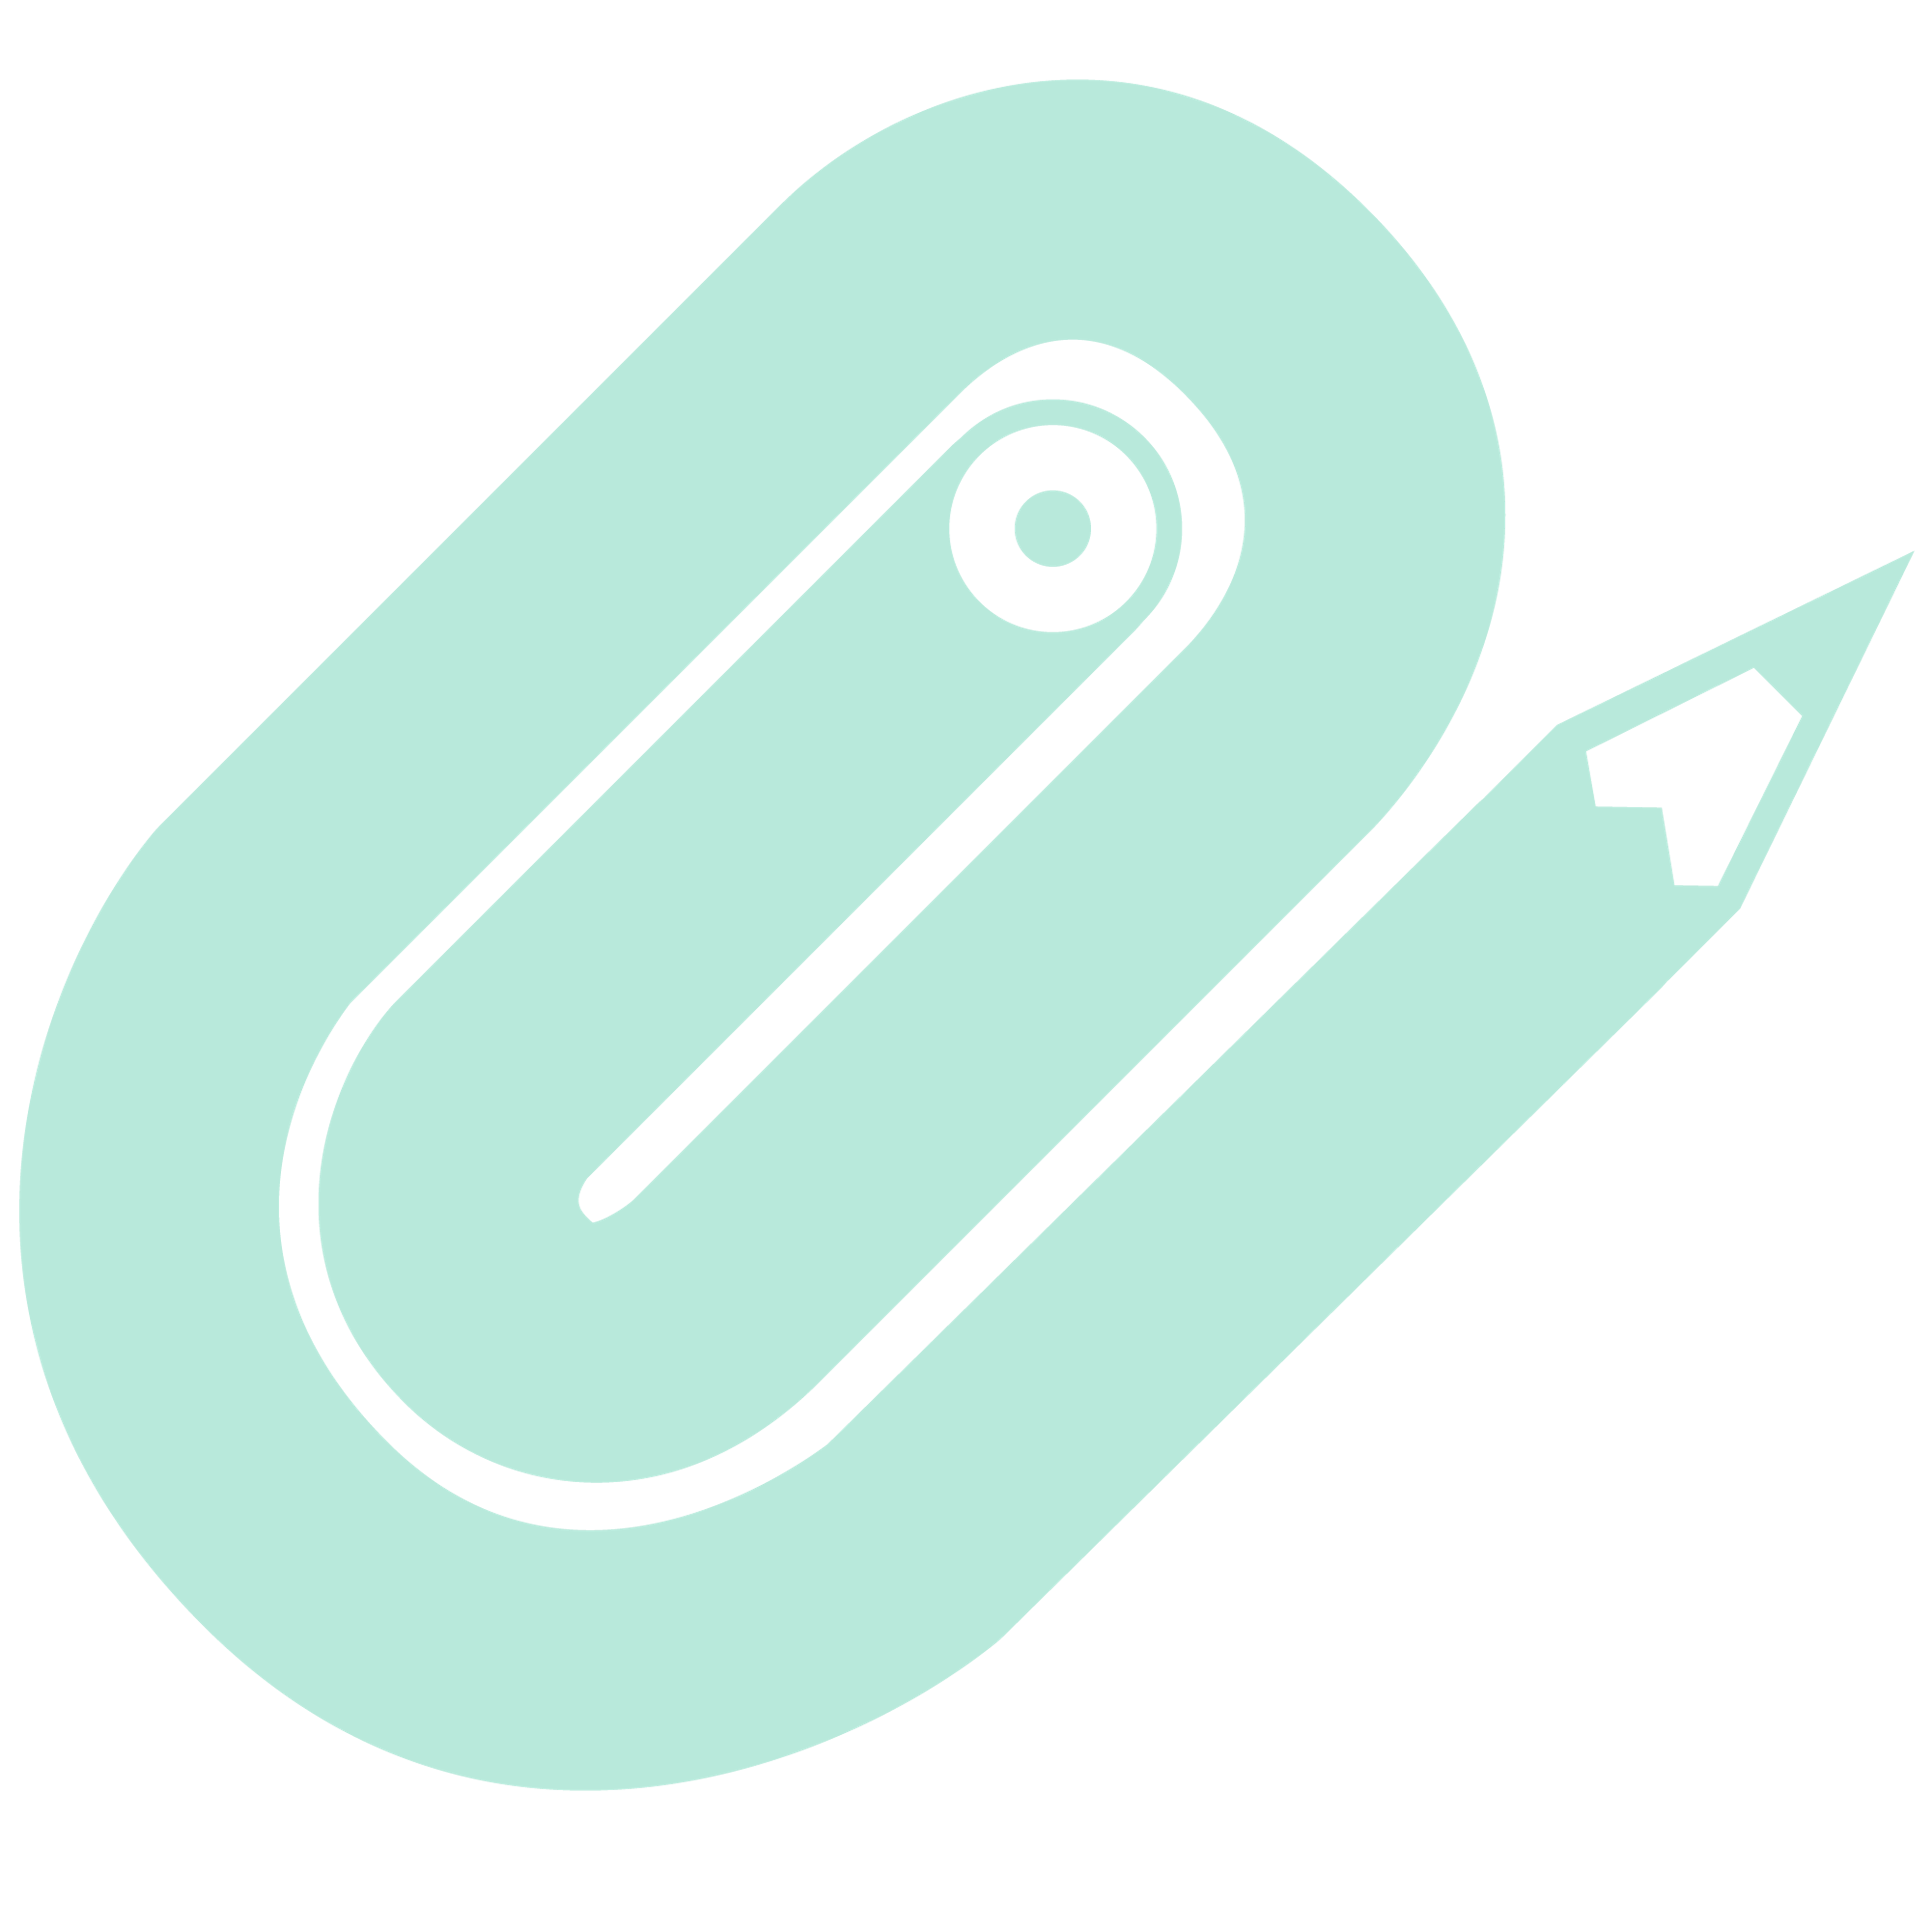 vector image of a twisted QAS pencil, like a paperclip, in a seafoam colour